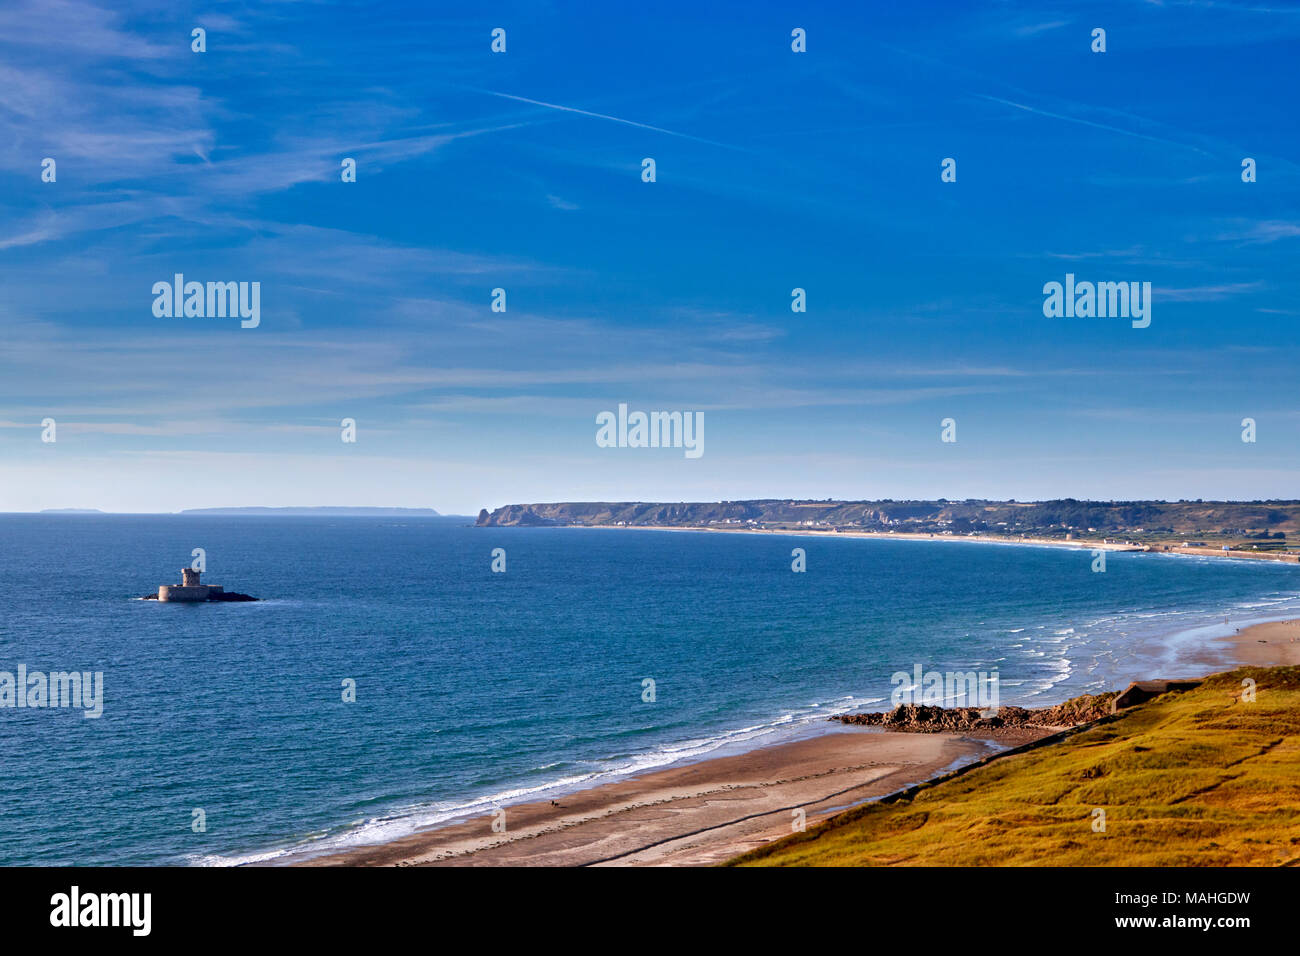 Image of St Ouens Bay with La Rocco Tower and shore line, Jersey Channel Isalnds Stock Photo